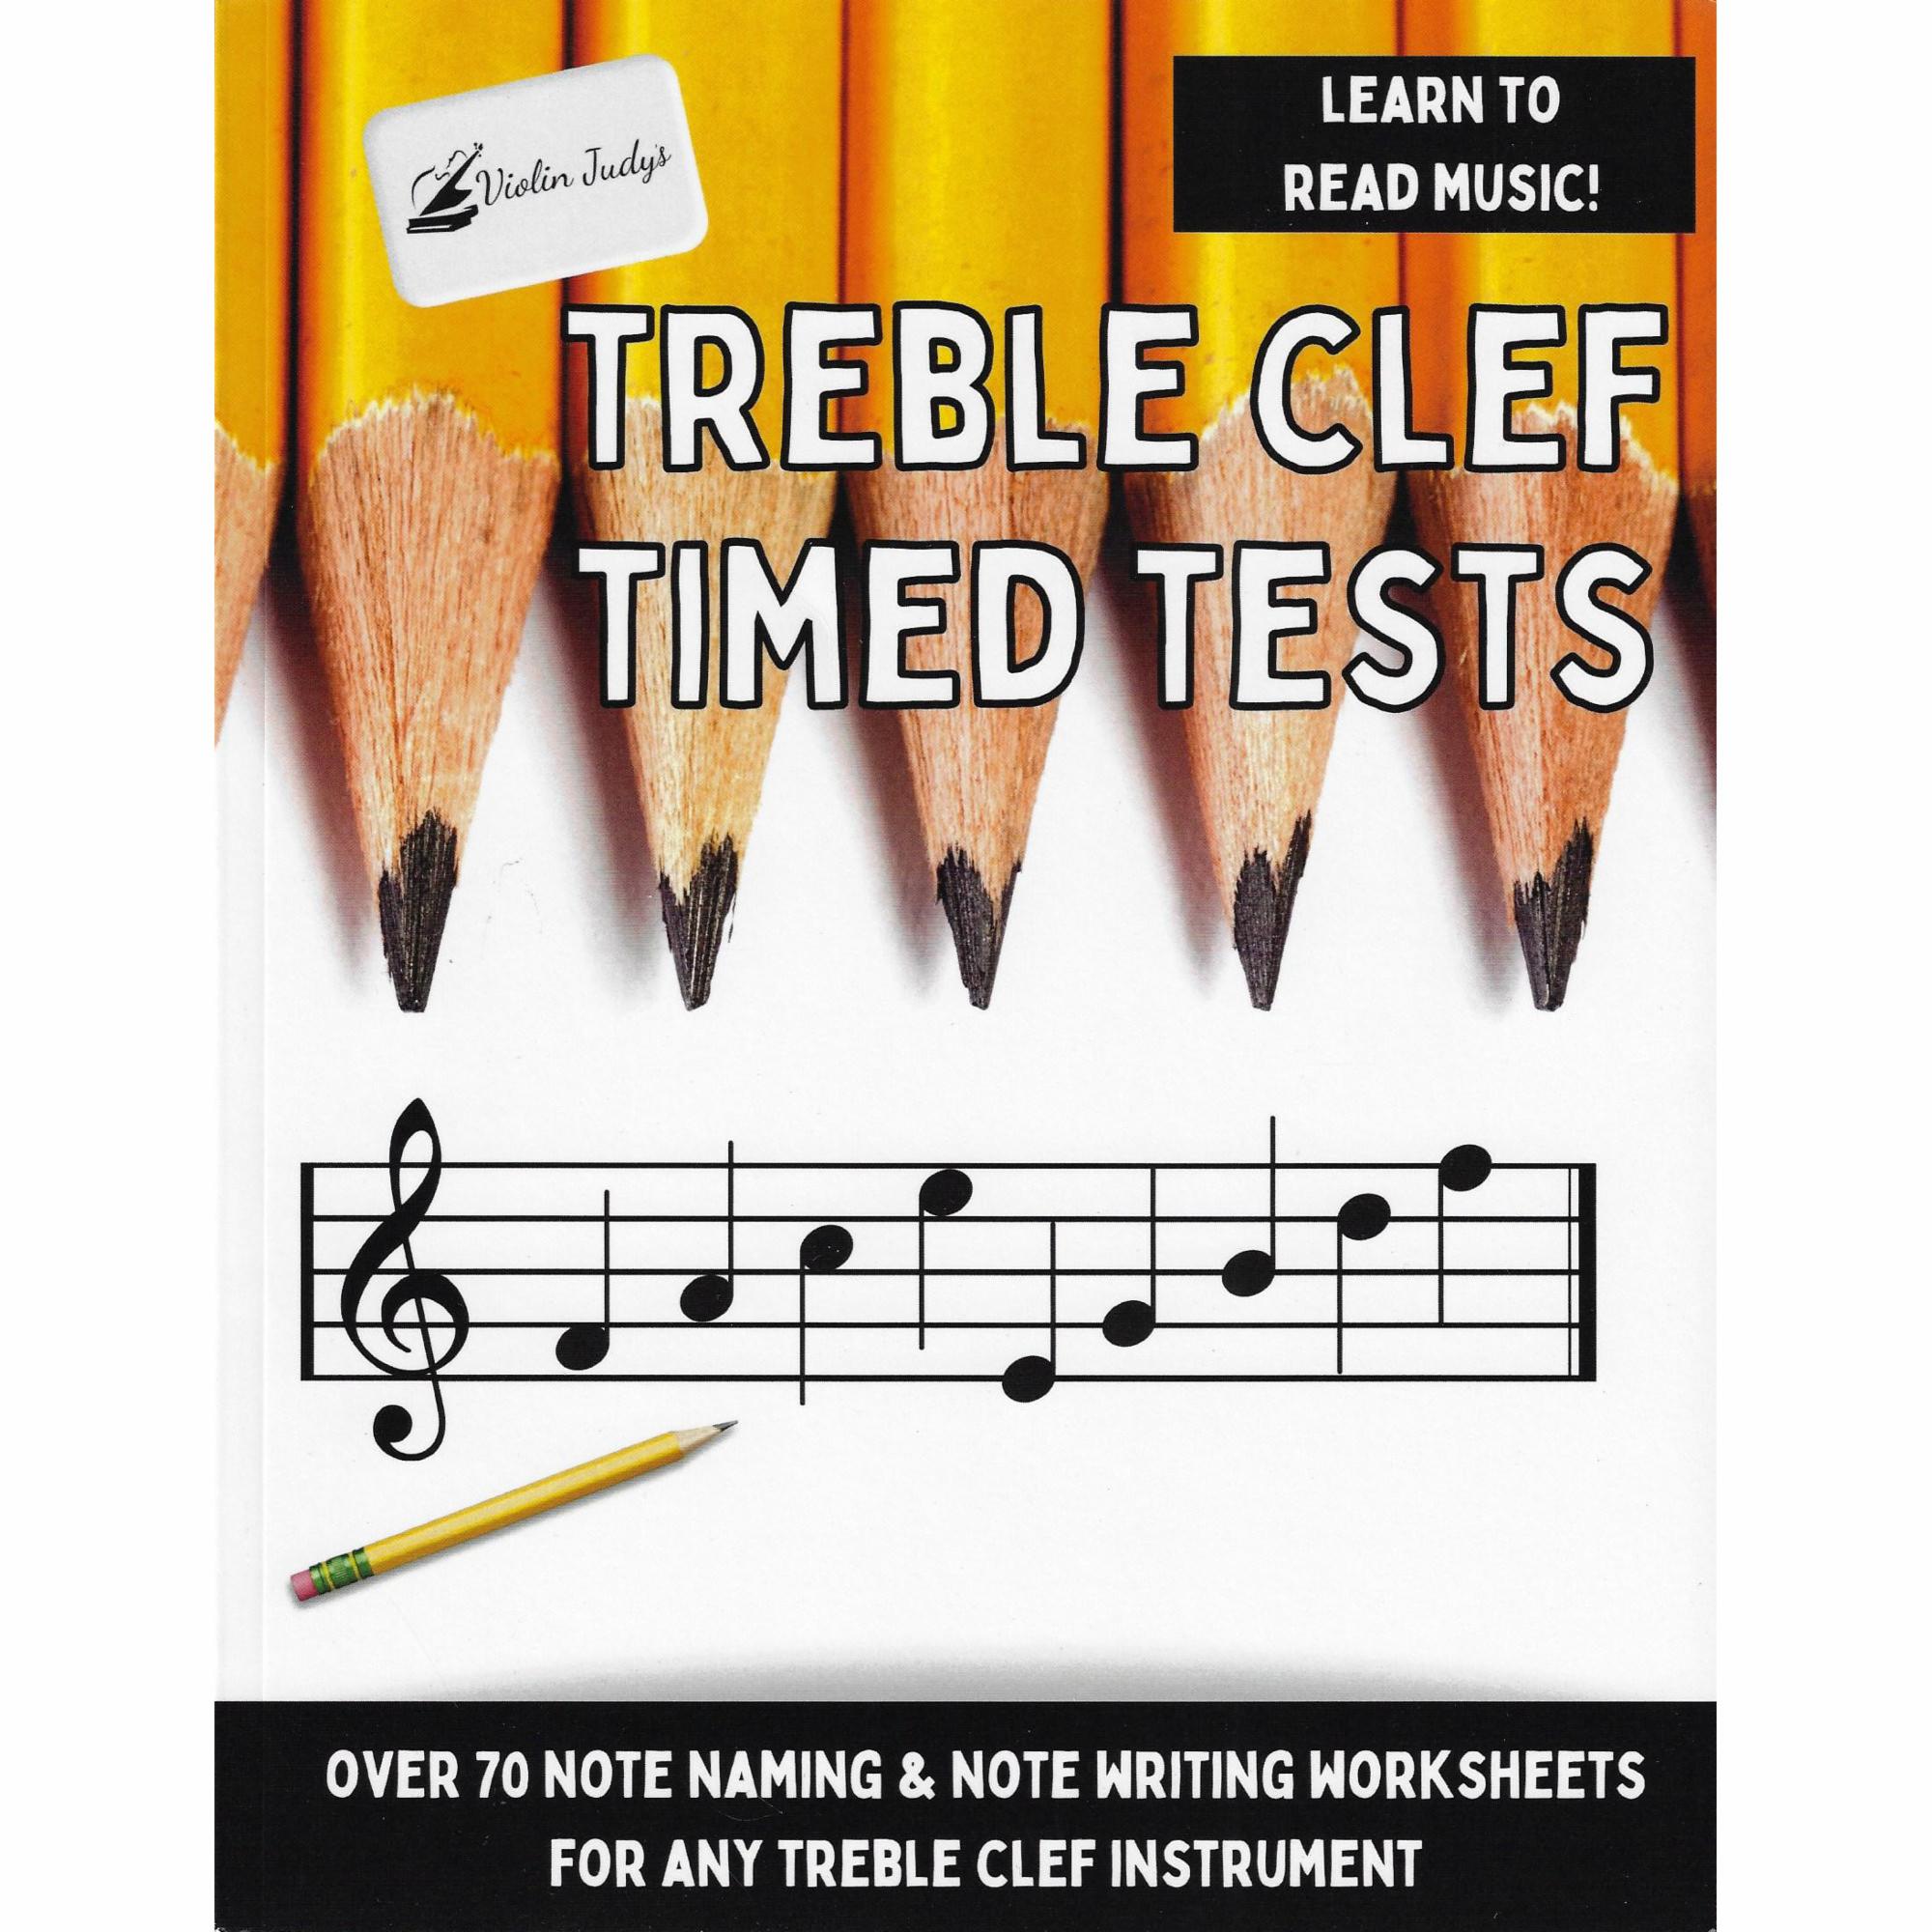 Violin Judy's Timed Tests for Treble or Bass Clef